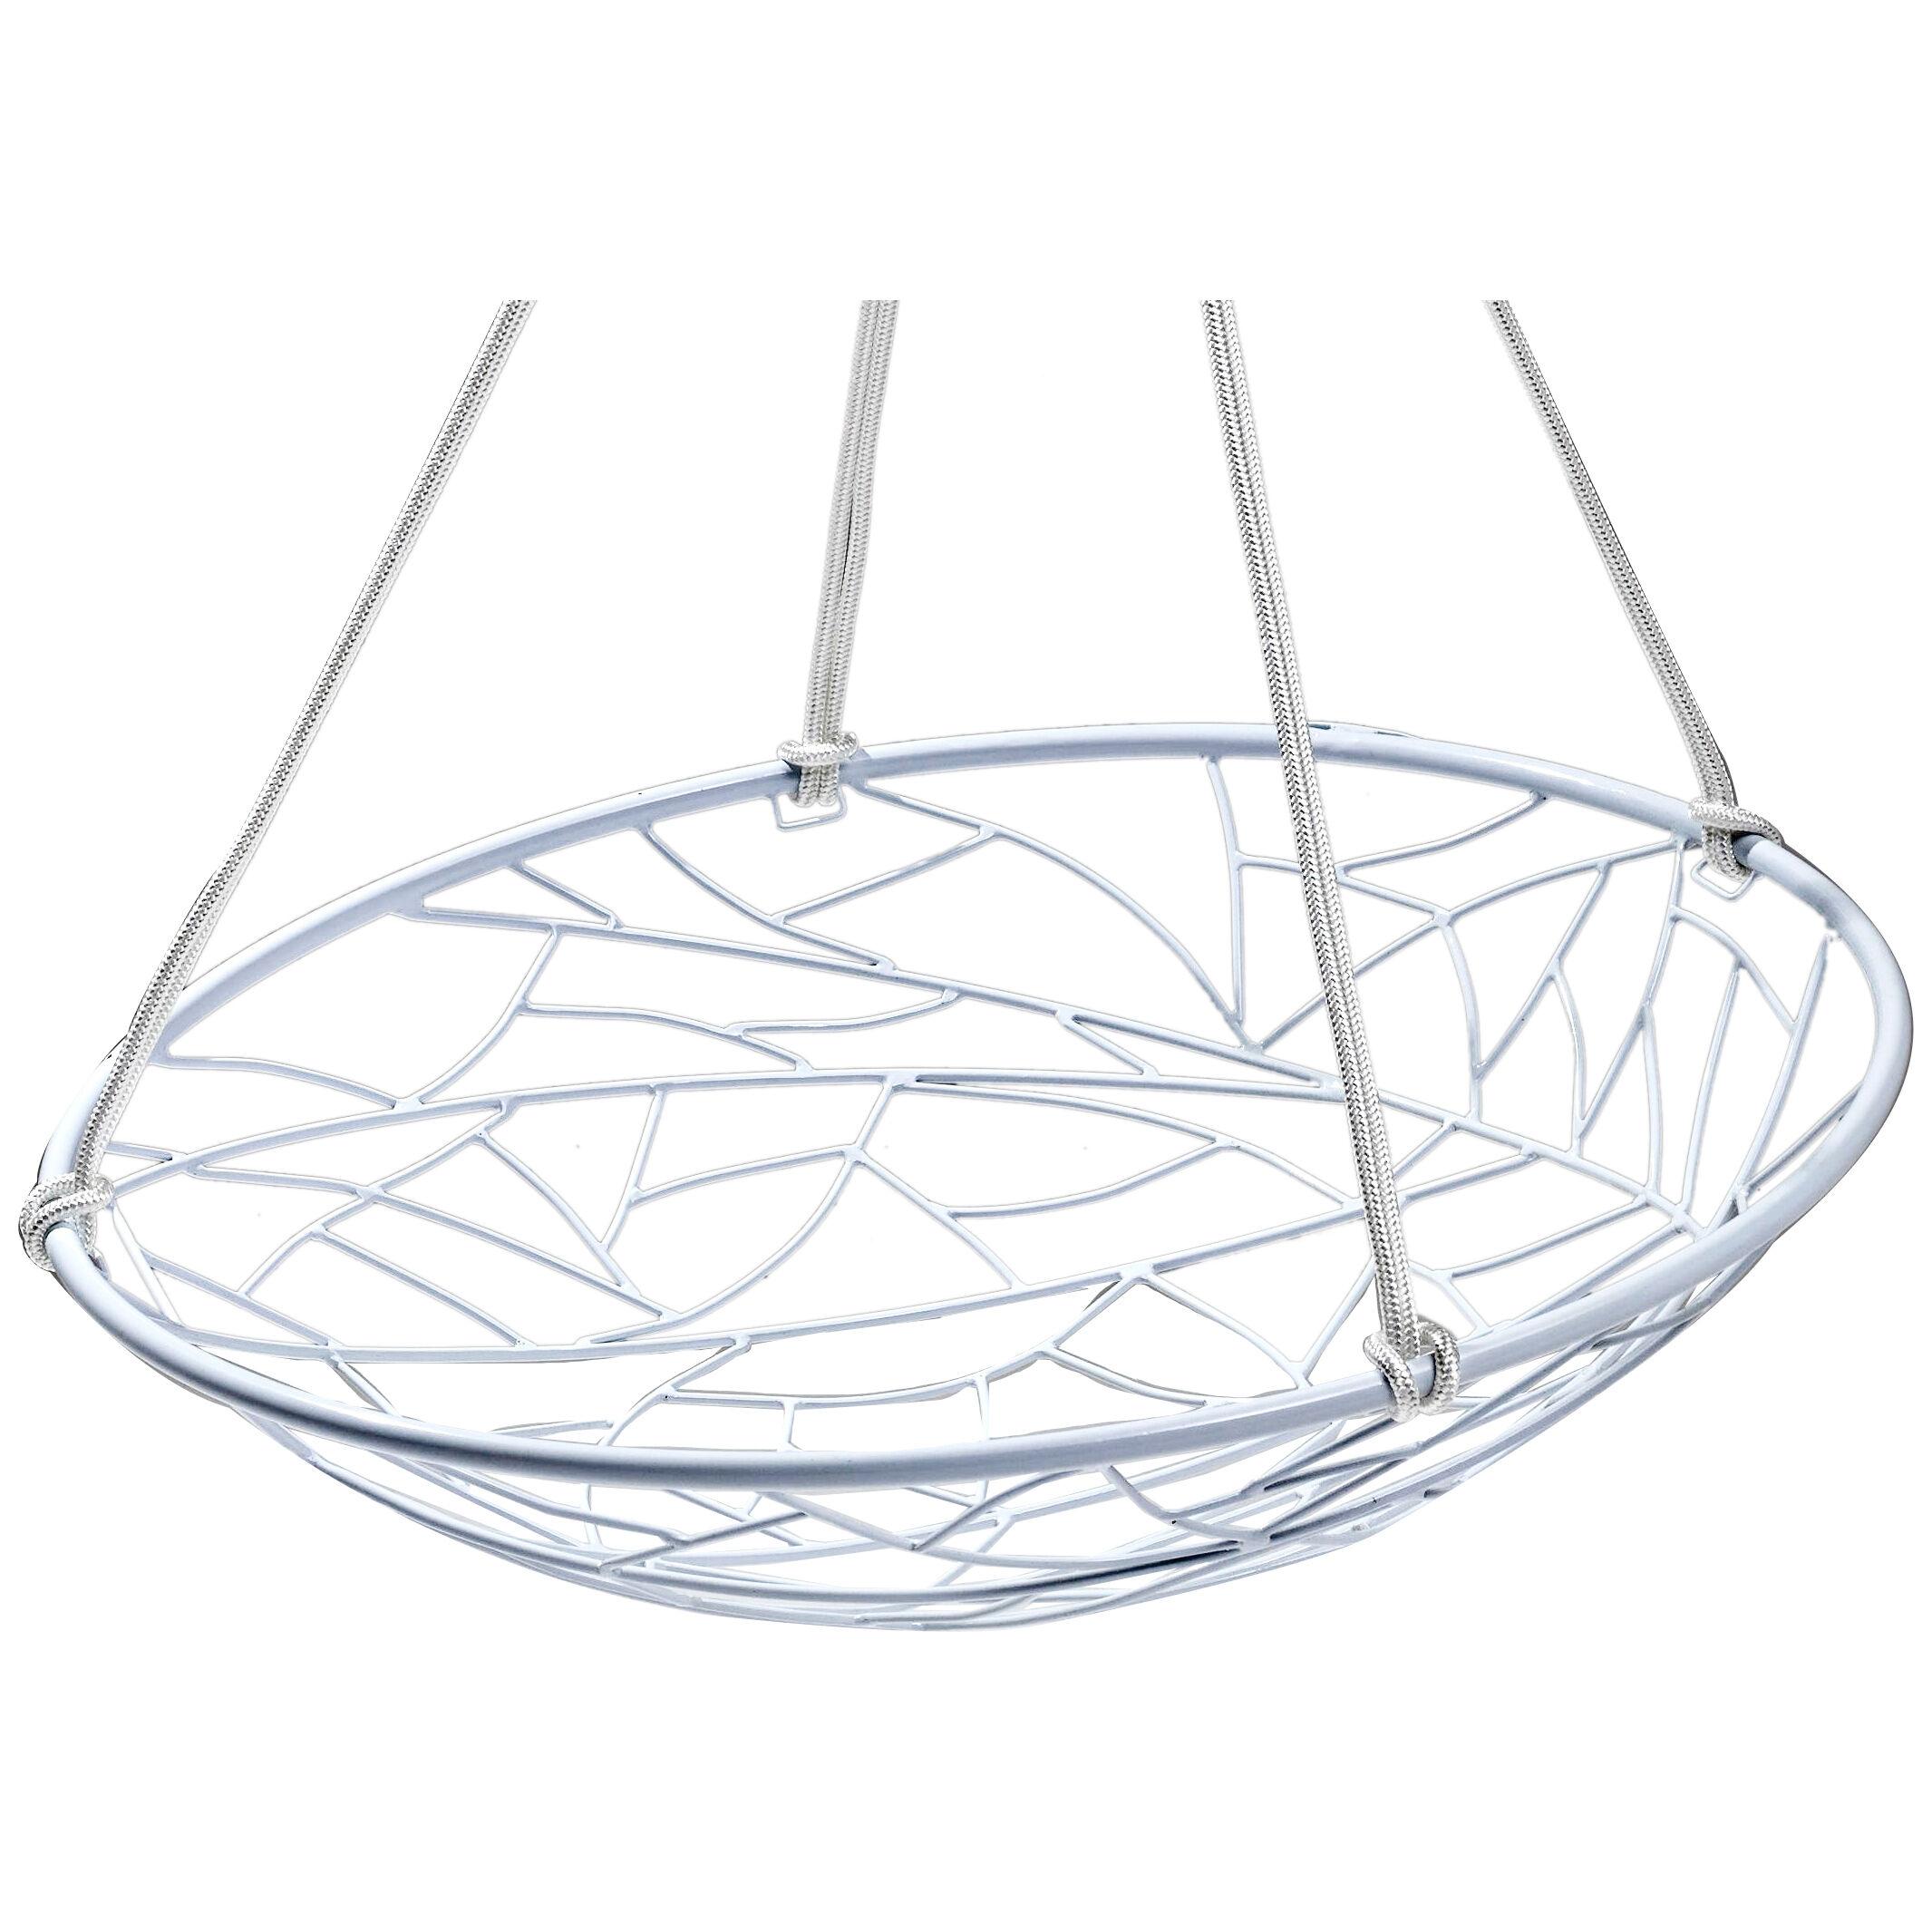 'BASKET - Twig' Hanging Swing Chair in White by Studio Stirling